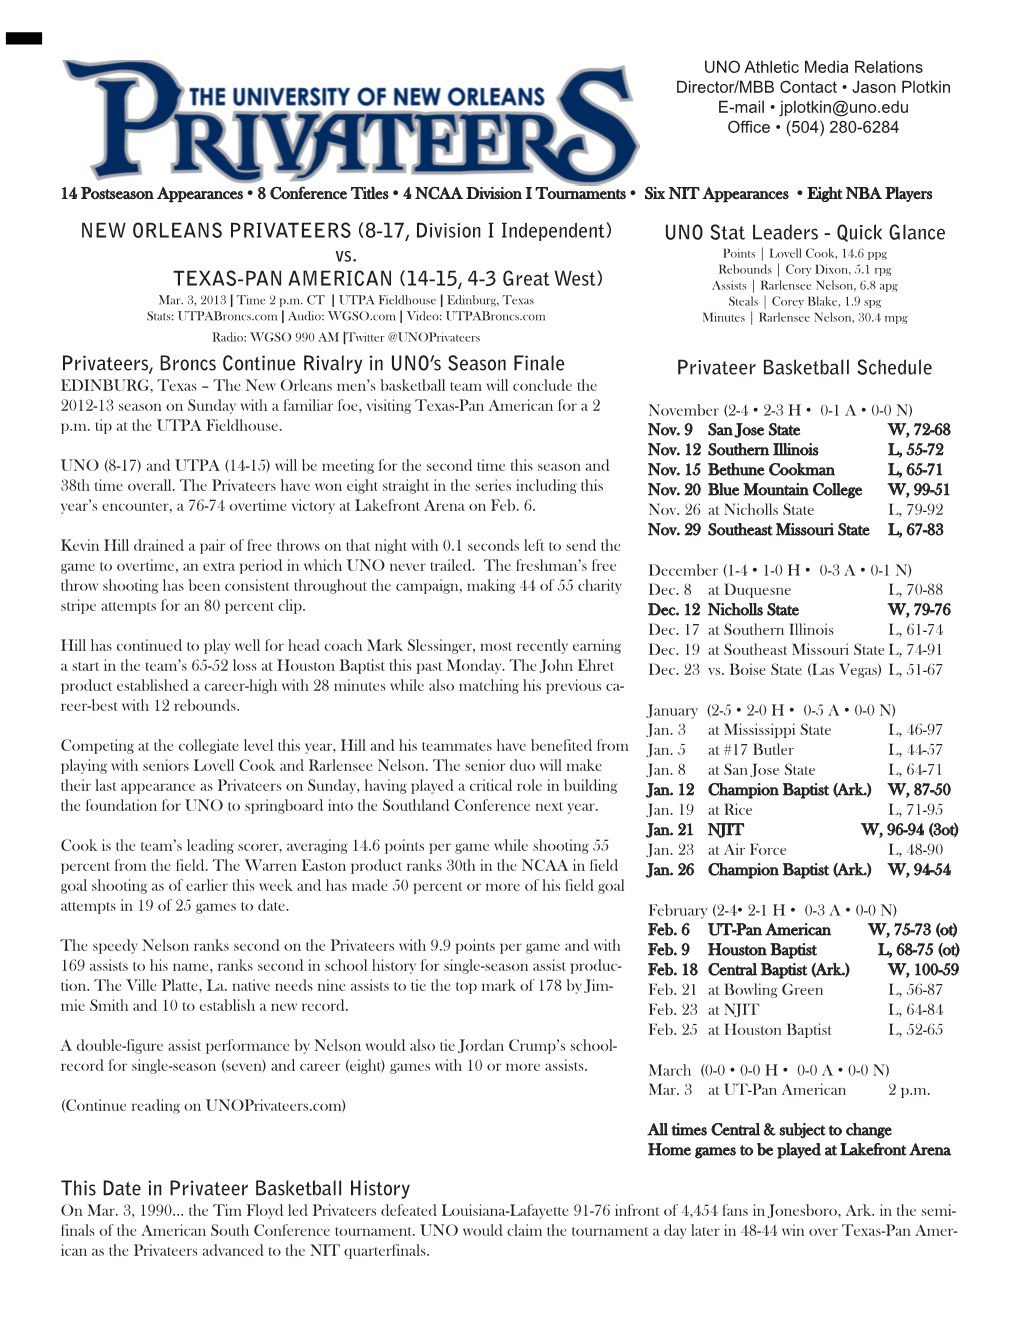 Privateer Basketball Schedule NEW ORLEANS PRIVATEERS (8-17